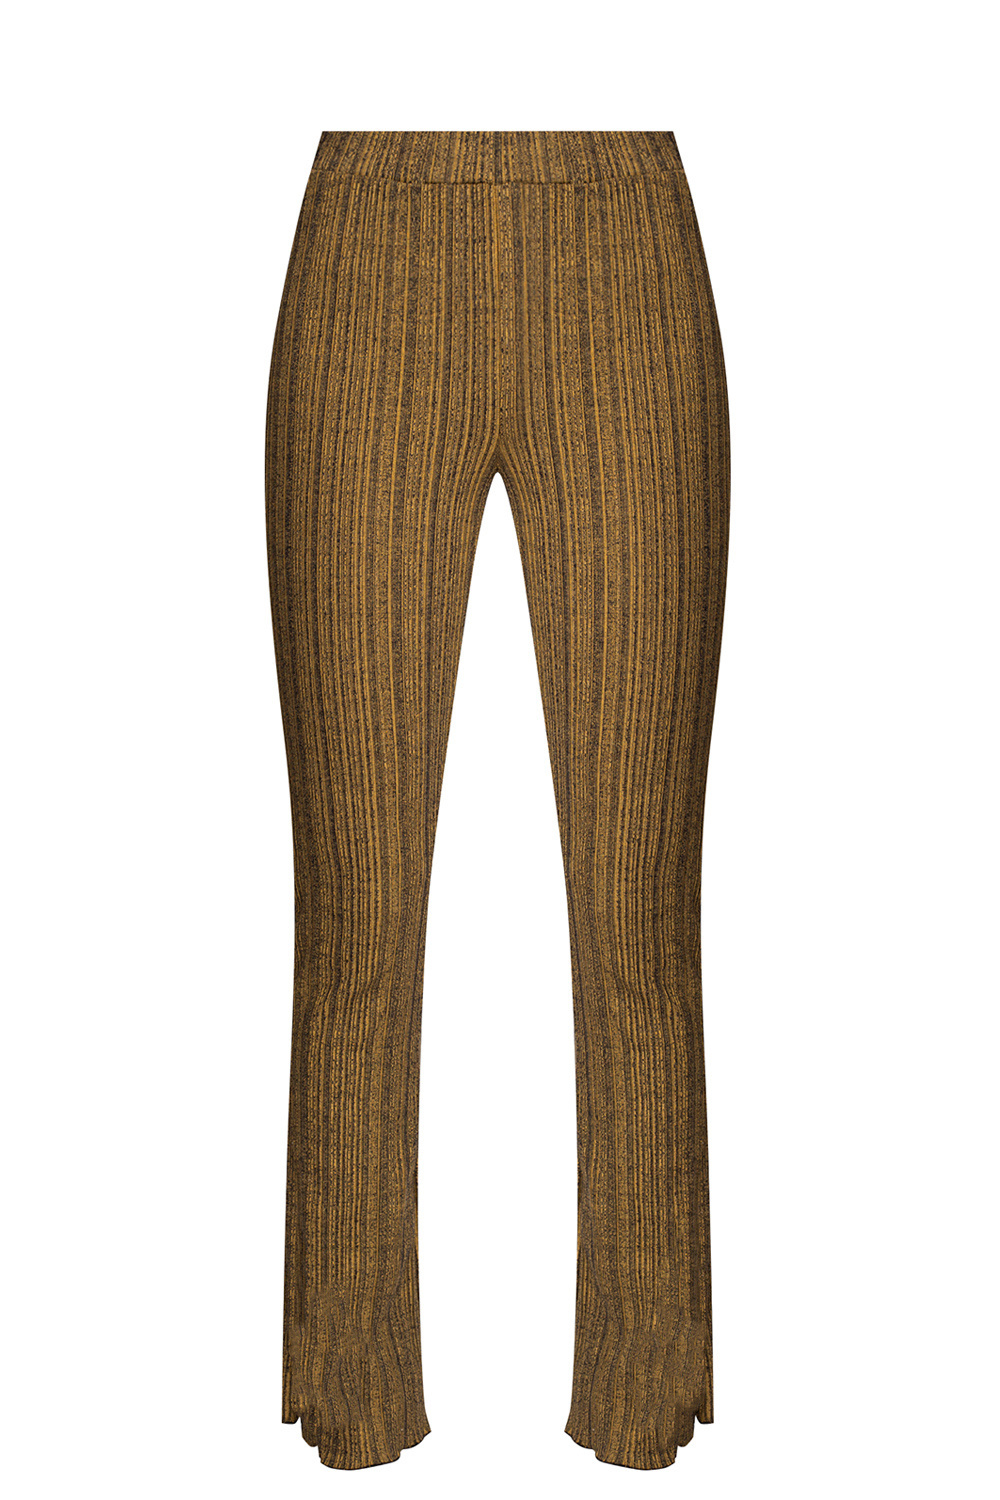 Rick Owens Ribbed Flared Trousers - Farfetch